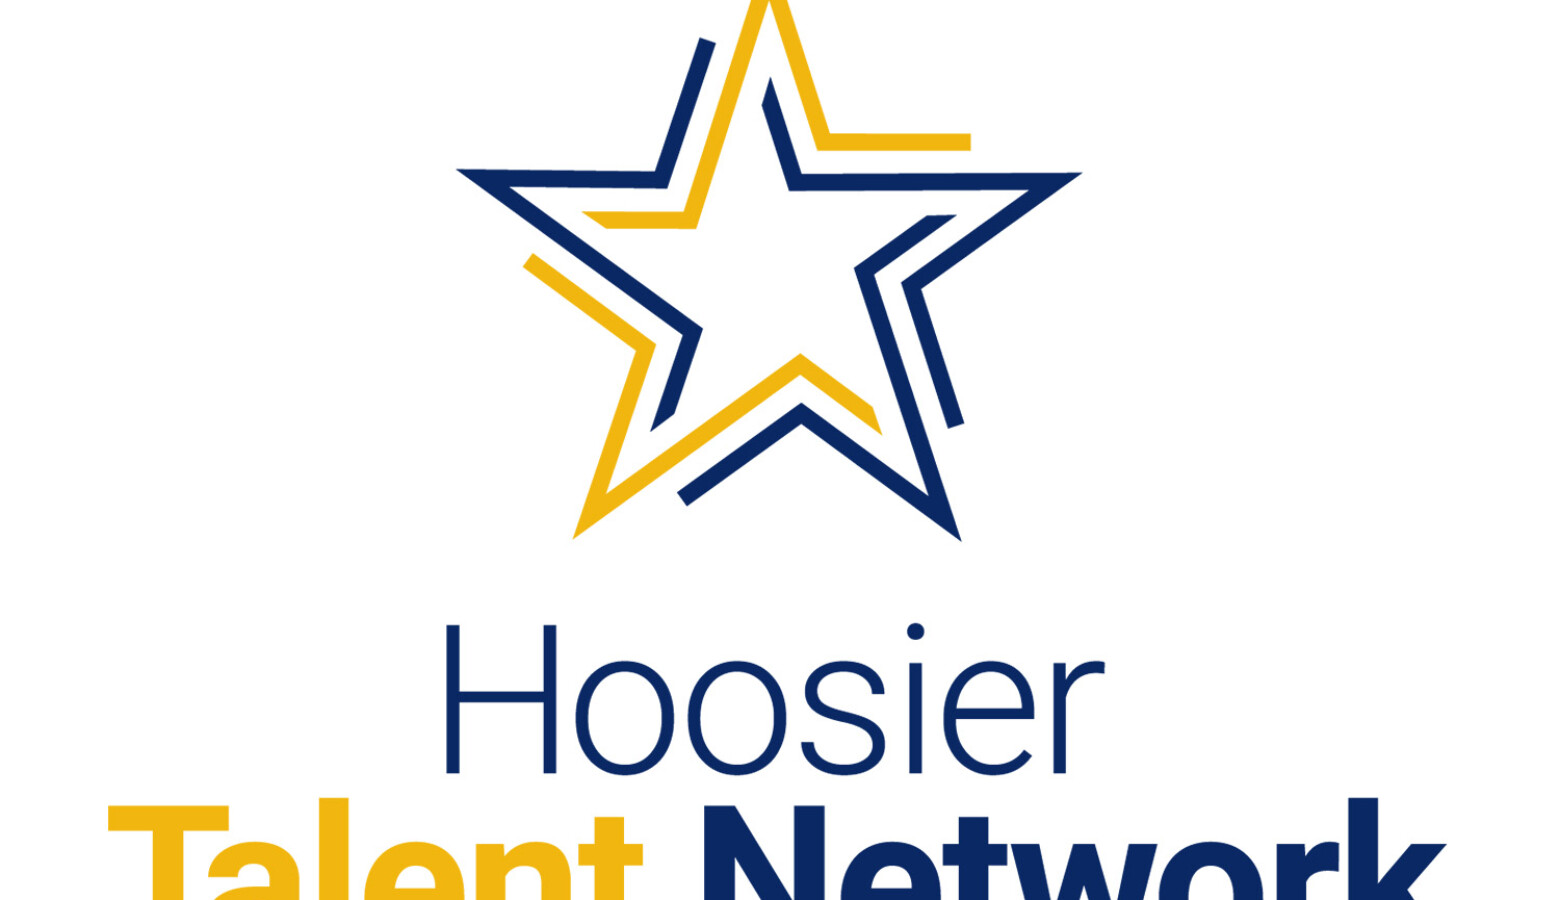 The Indiana Department of Workforce Development has launched a job board to help unemployed or underemployed Hoosiers find work, it's called the "Hoosier Talent Network." (Courtesy Indiana DWD)